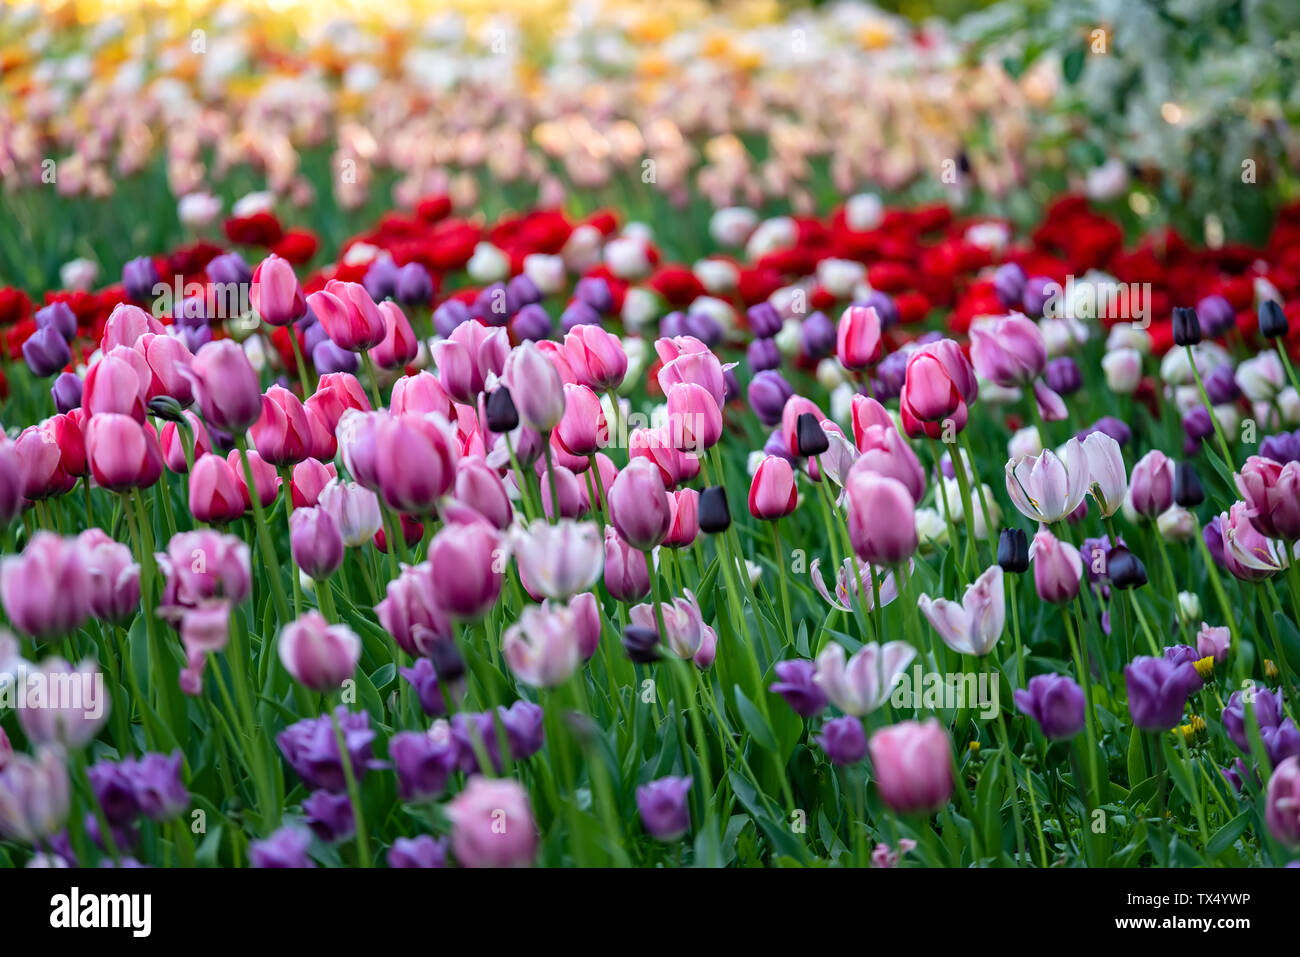 Multi colored field with red yellow dark violet and white tulips